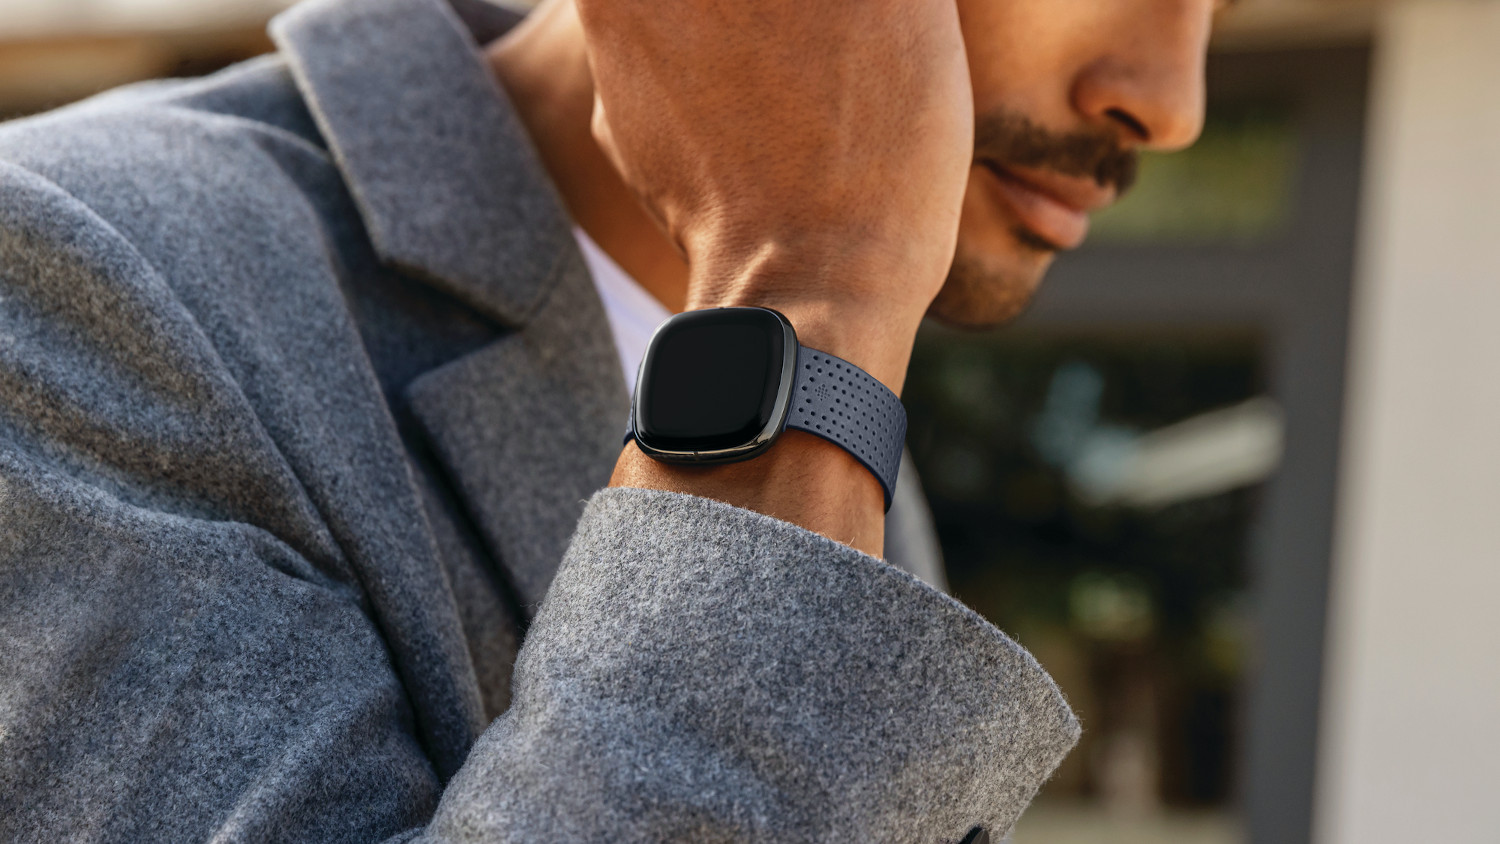 Fitbit Launches Sense Watch with ECG sensor, Alongside Versa 3 and